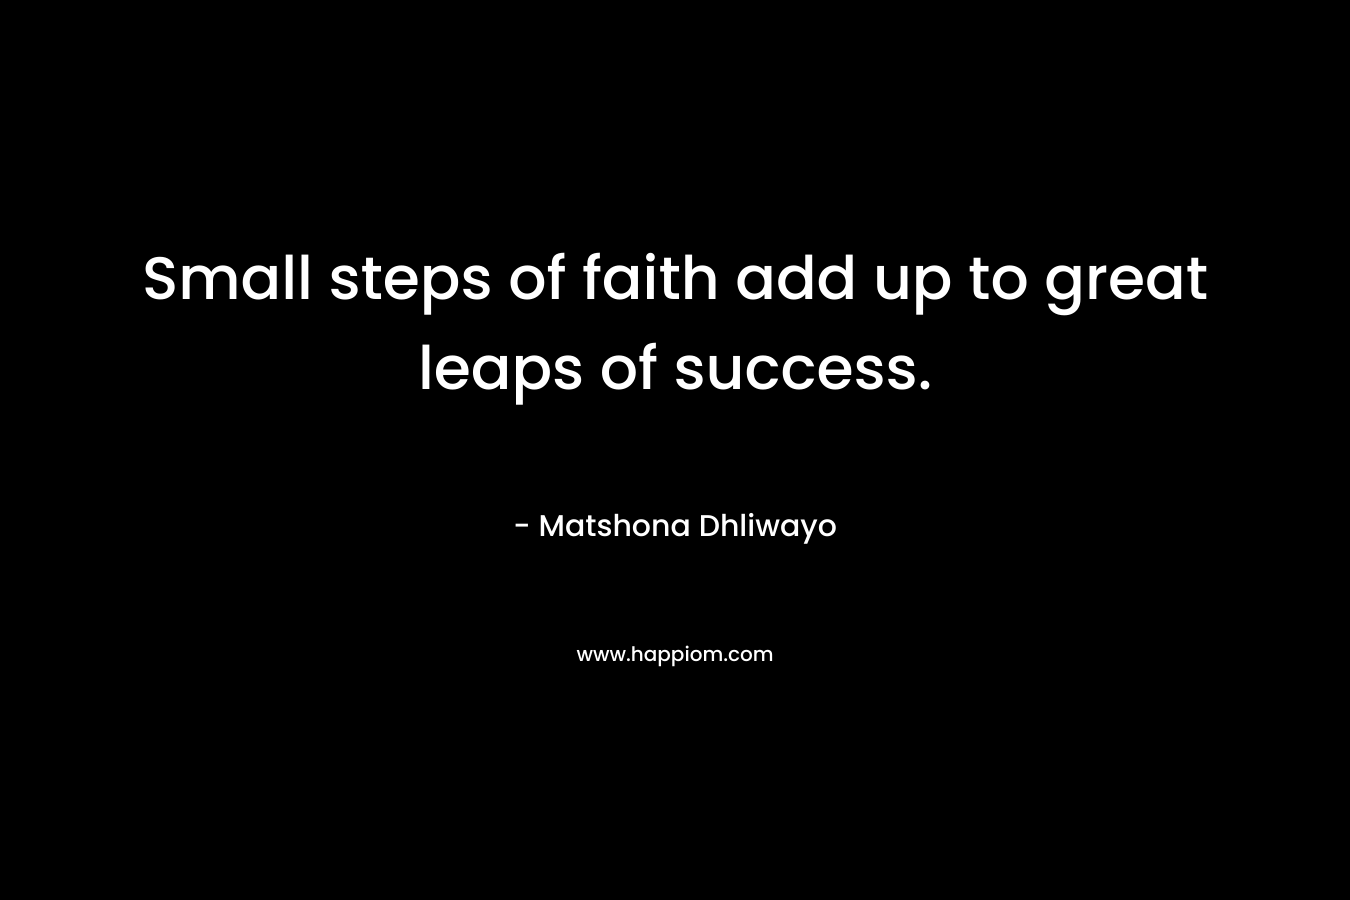 Small steps of faith add up to great leaps of success.